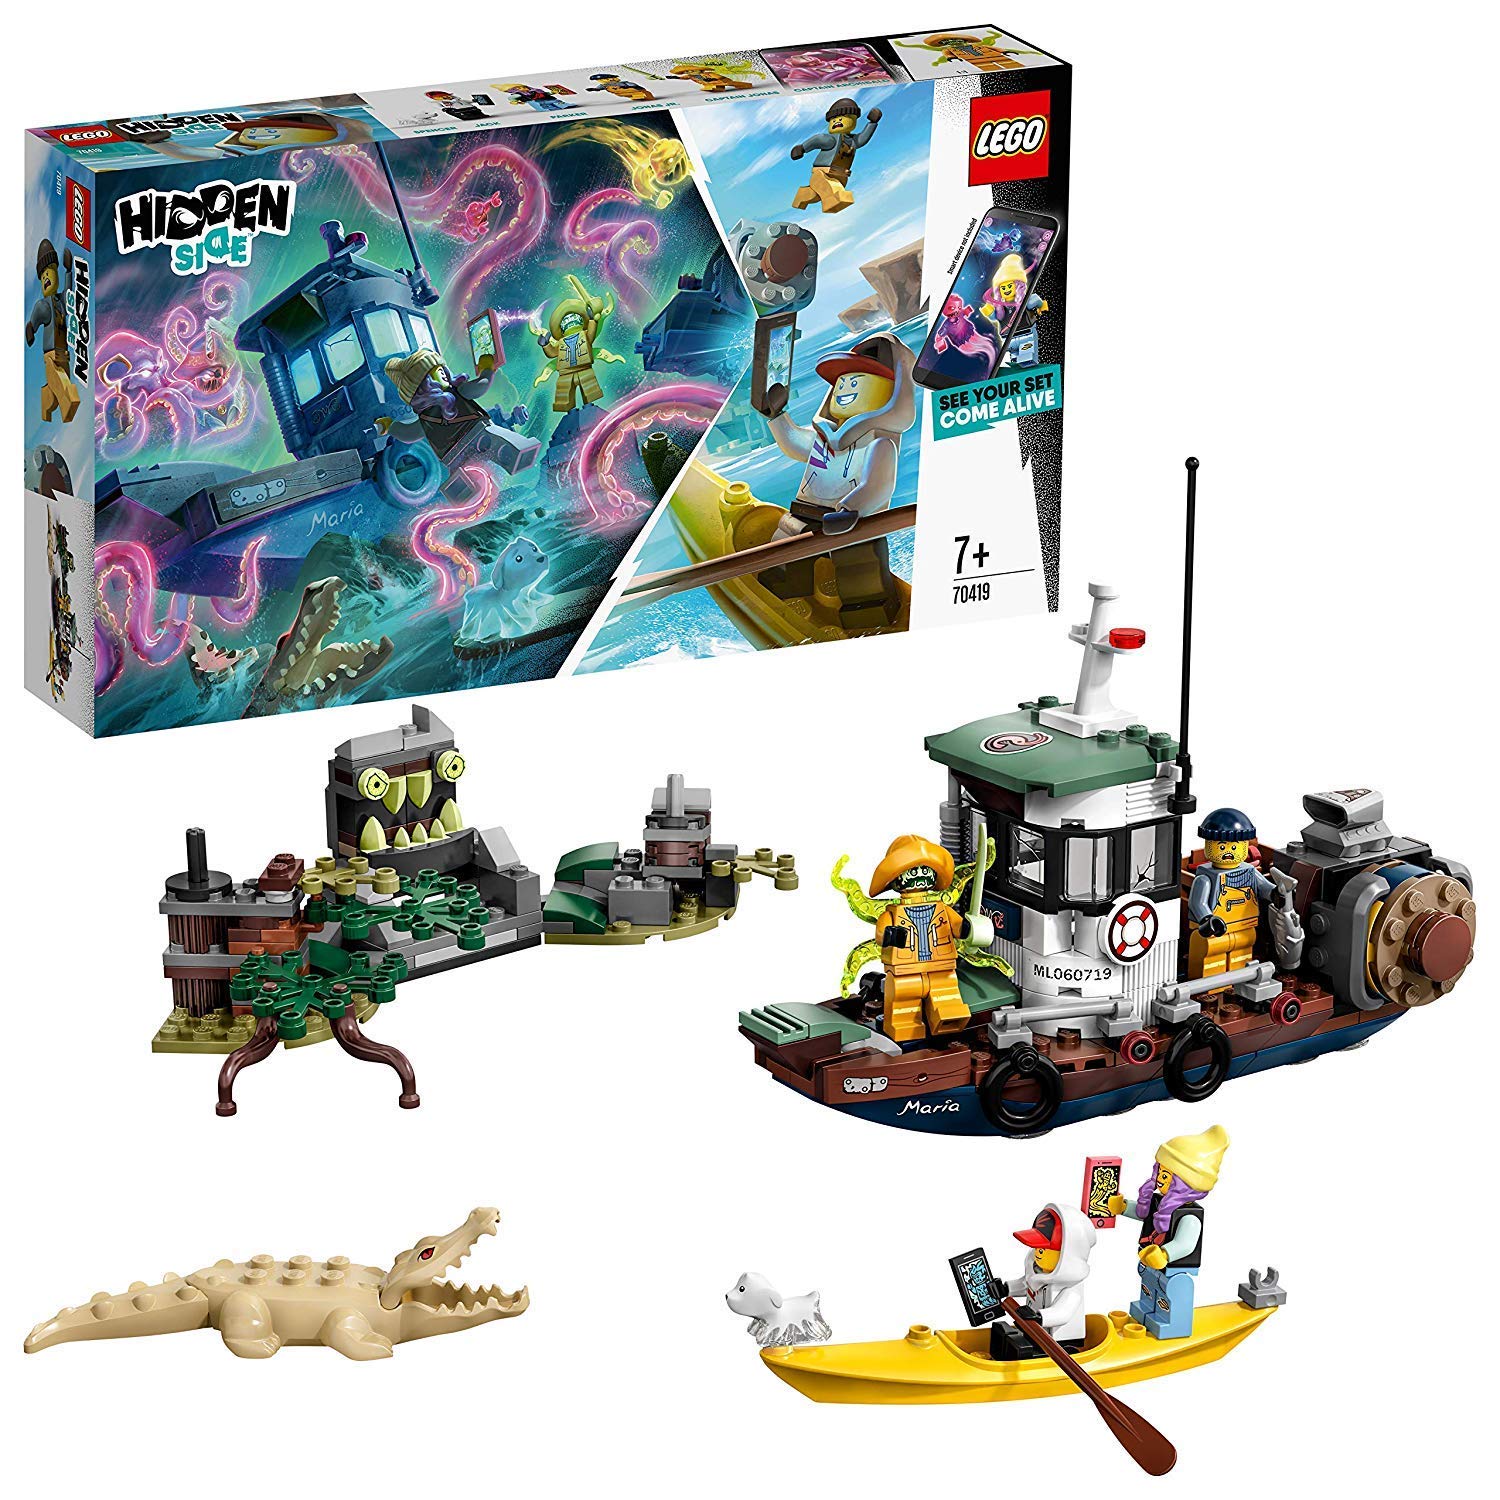 Lego 70419 Hidden Side Shrimp Boat, Toy For Children With Augmented Reality